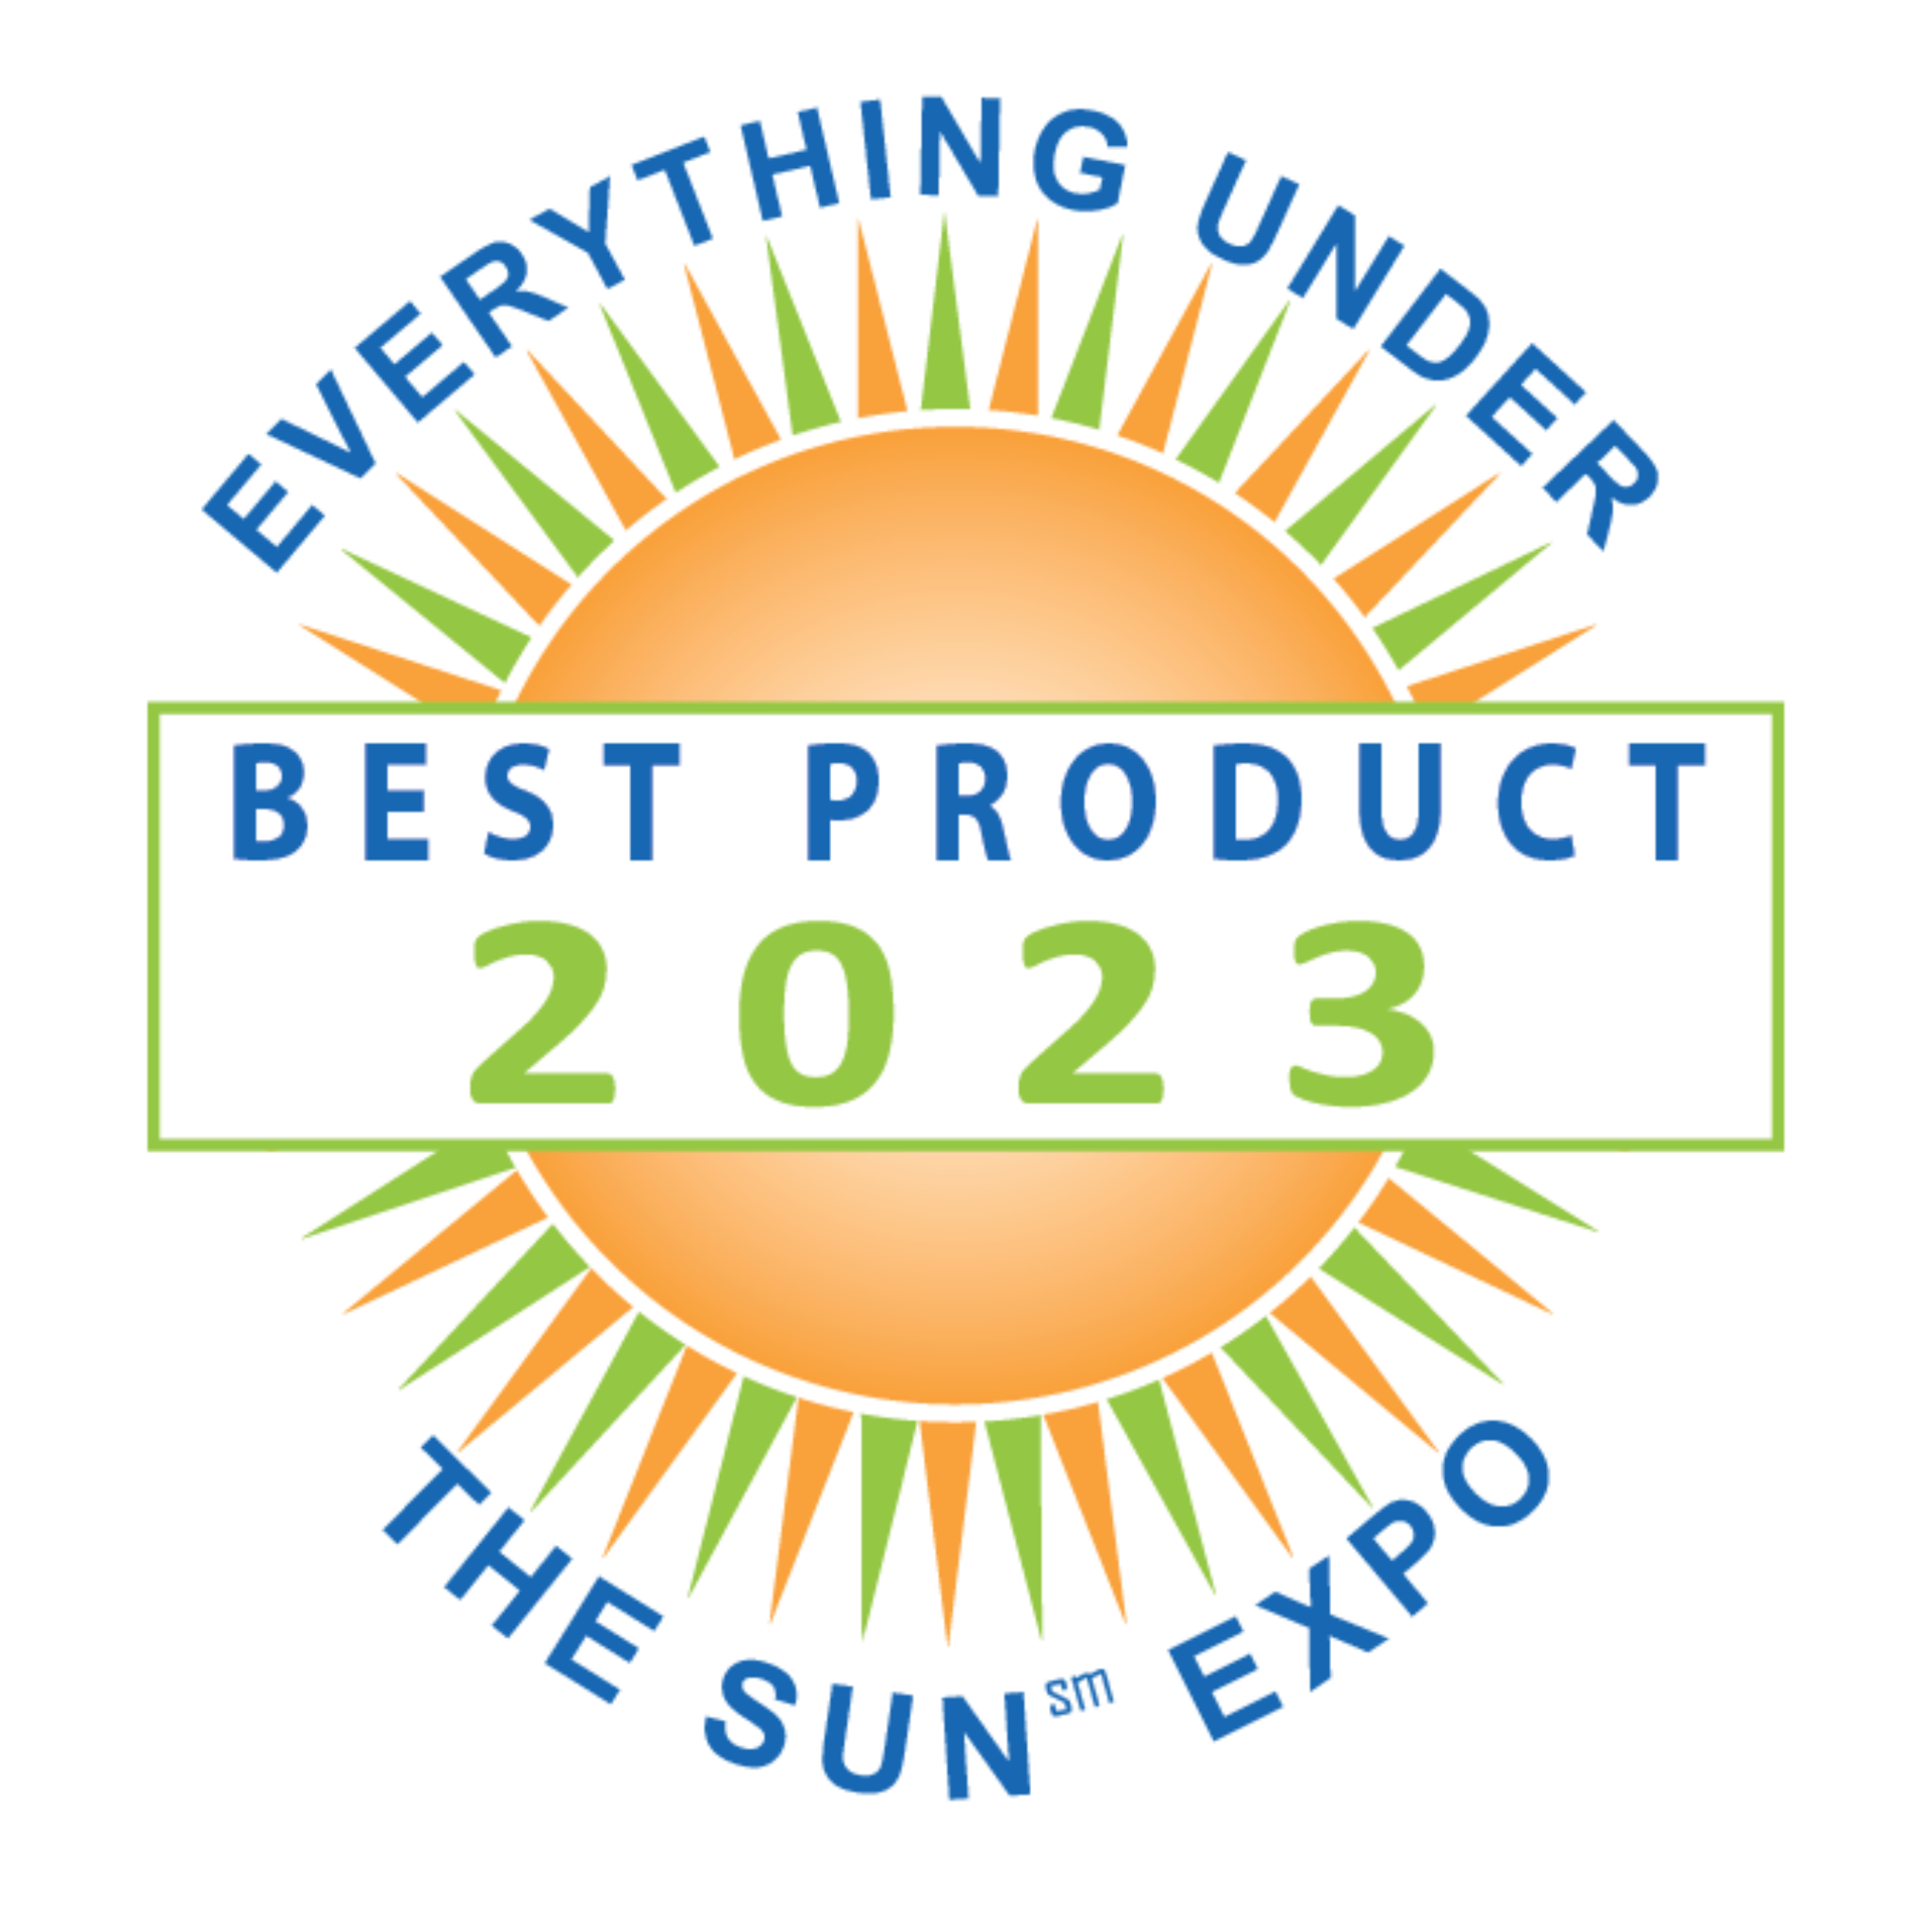 Everything Under The Sun - Best Product 2023 - Cyclone Filter Cleaner 